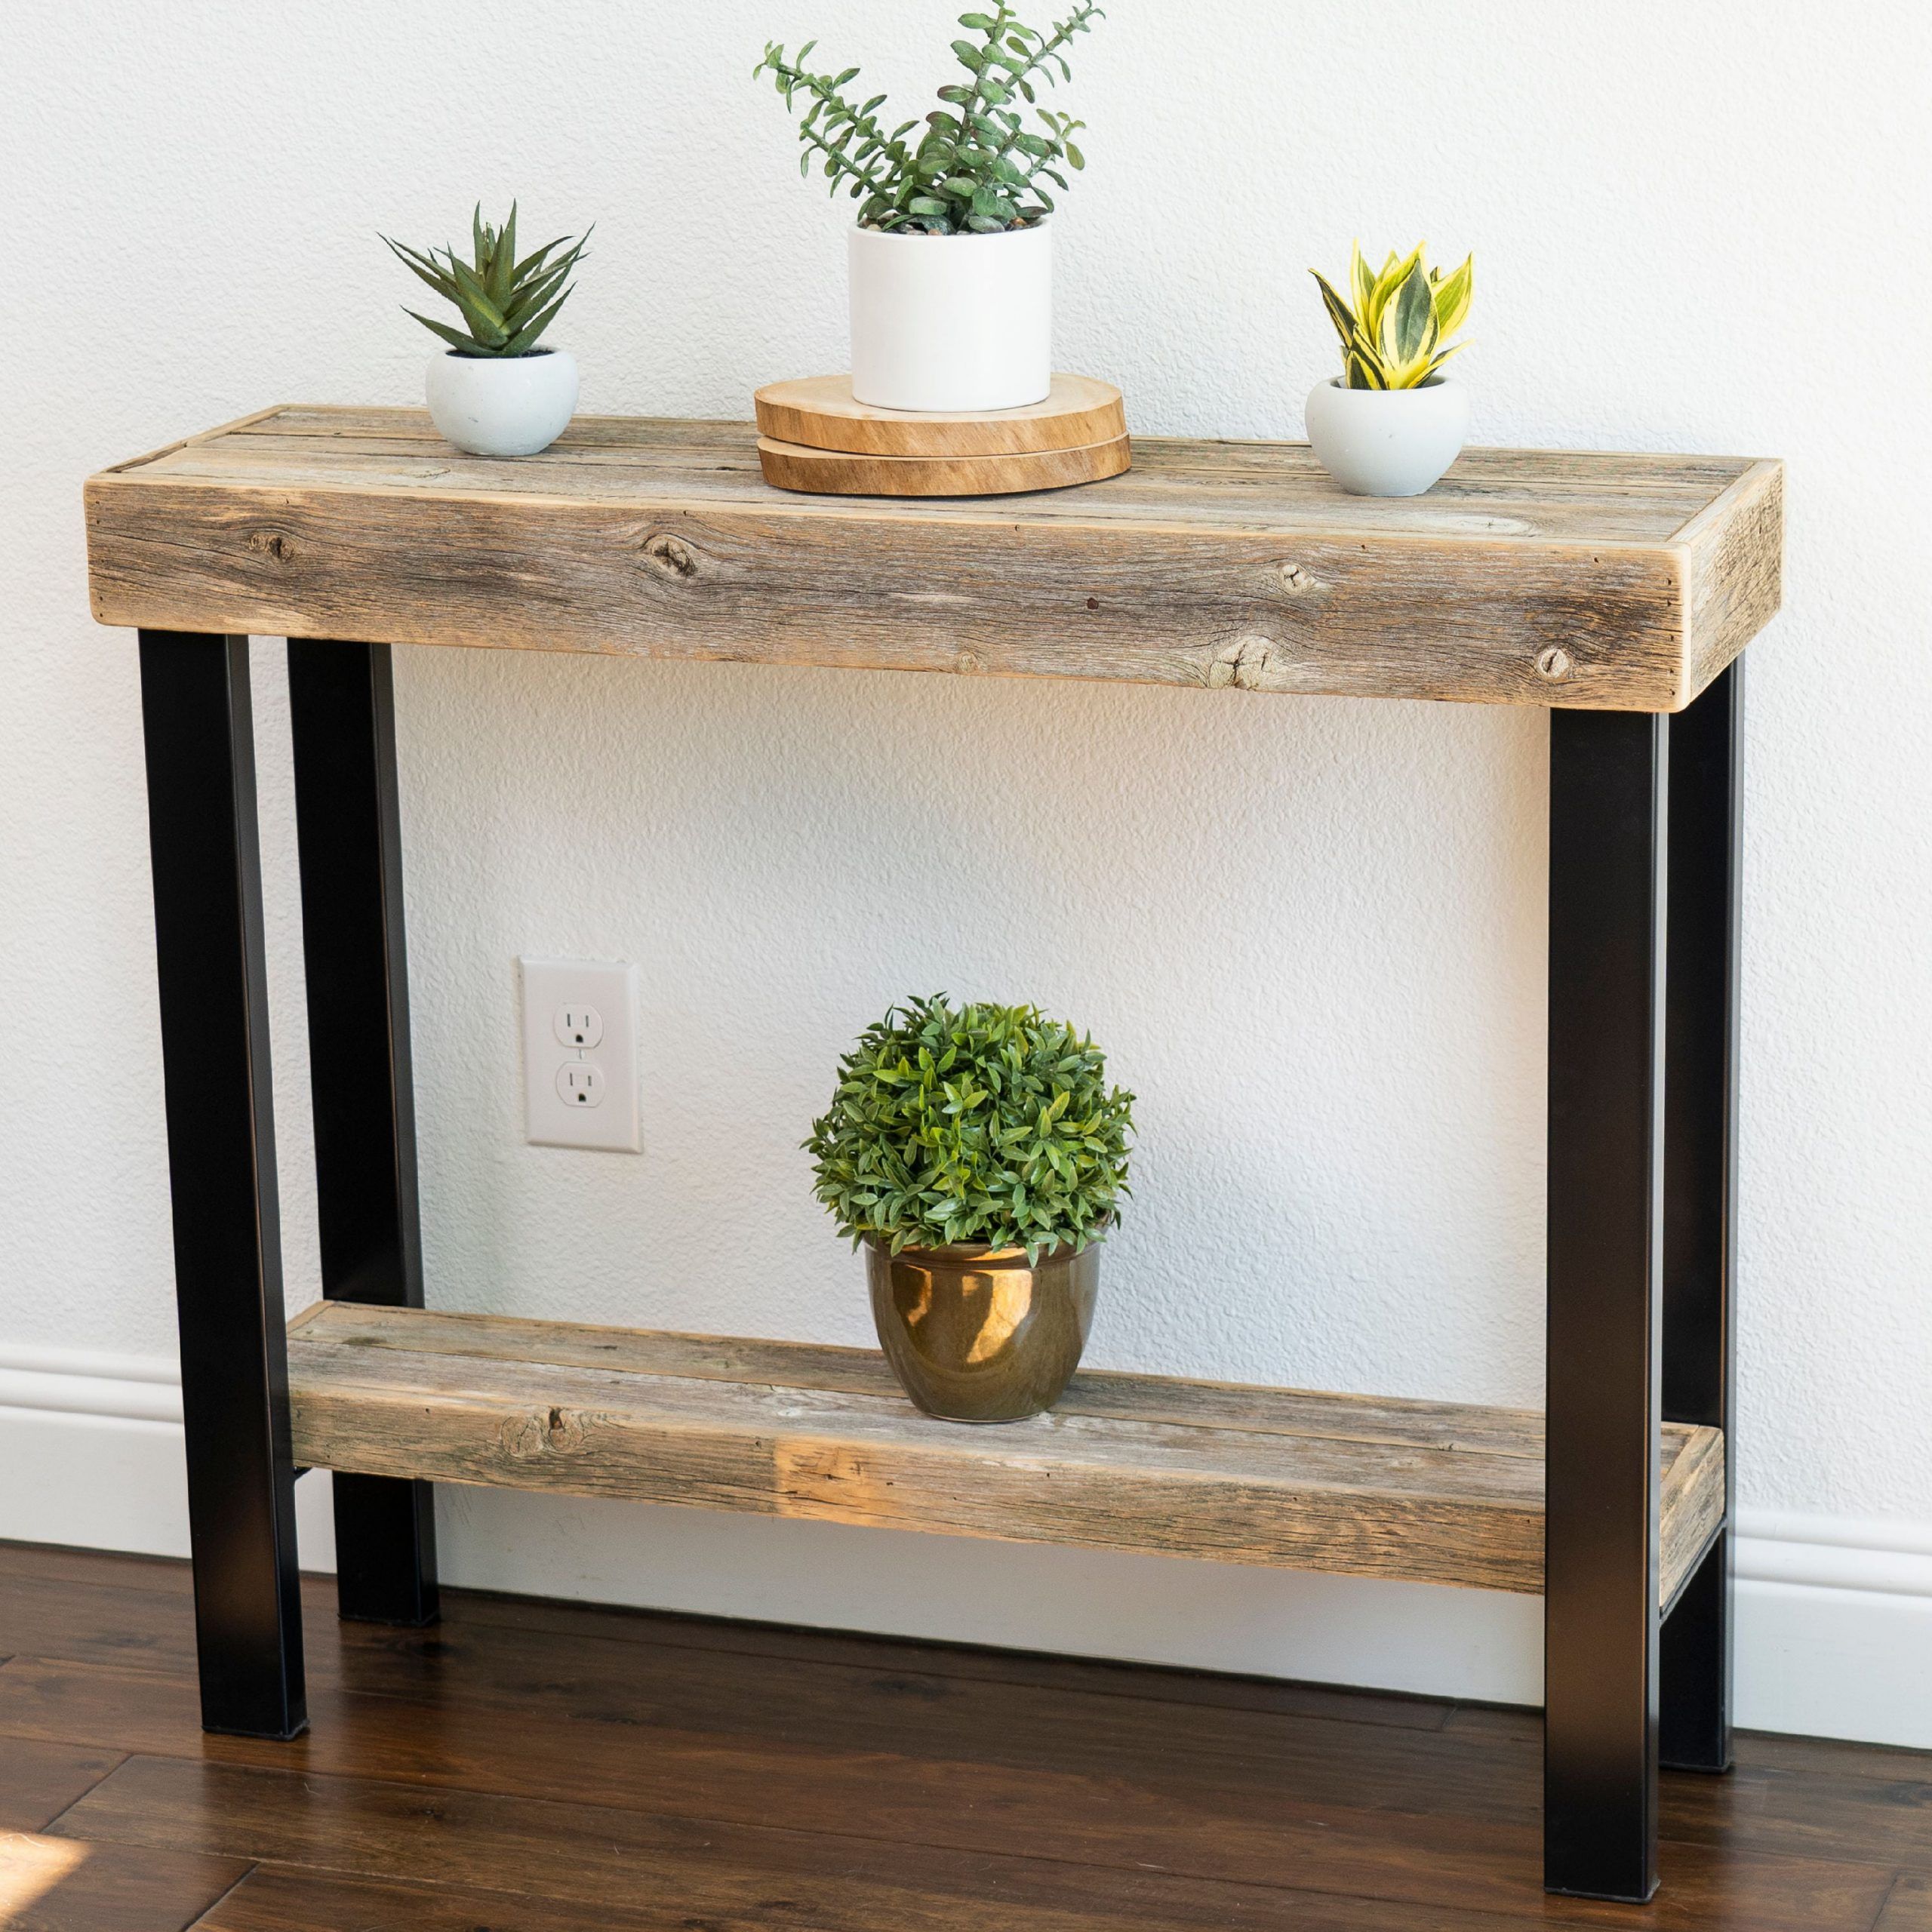 Roland Small Living Room Console Table, Reclaimed Wood W/ Black Intended For Black Metal Console Tables (View 4 of 20)